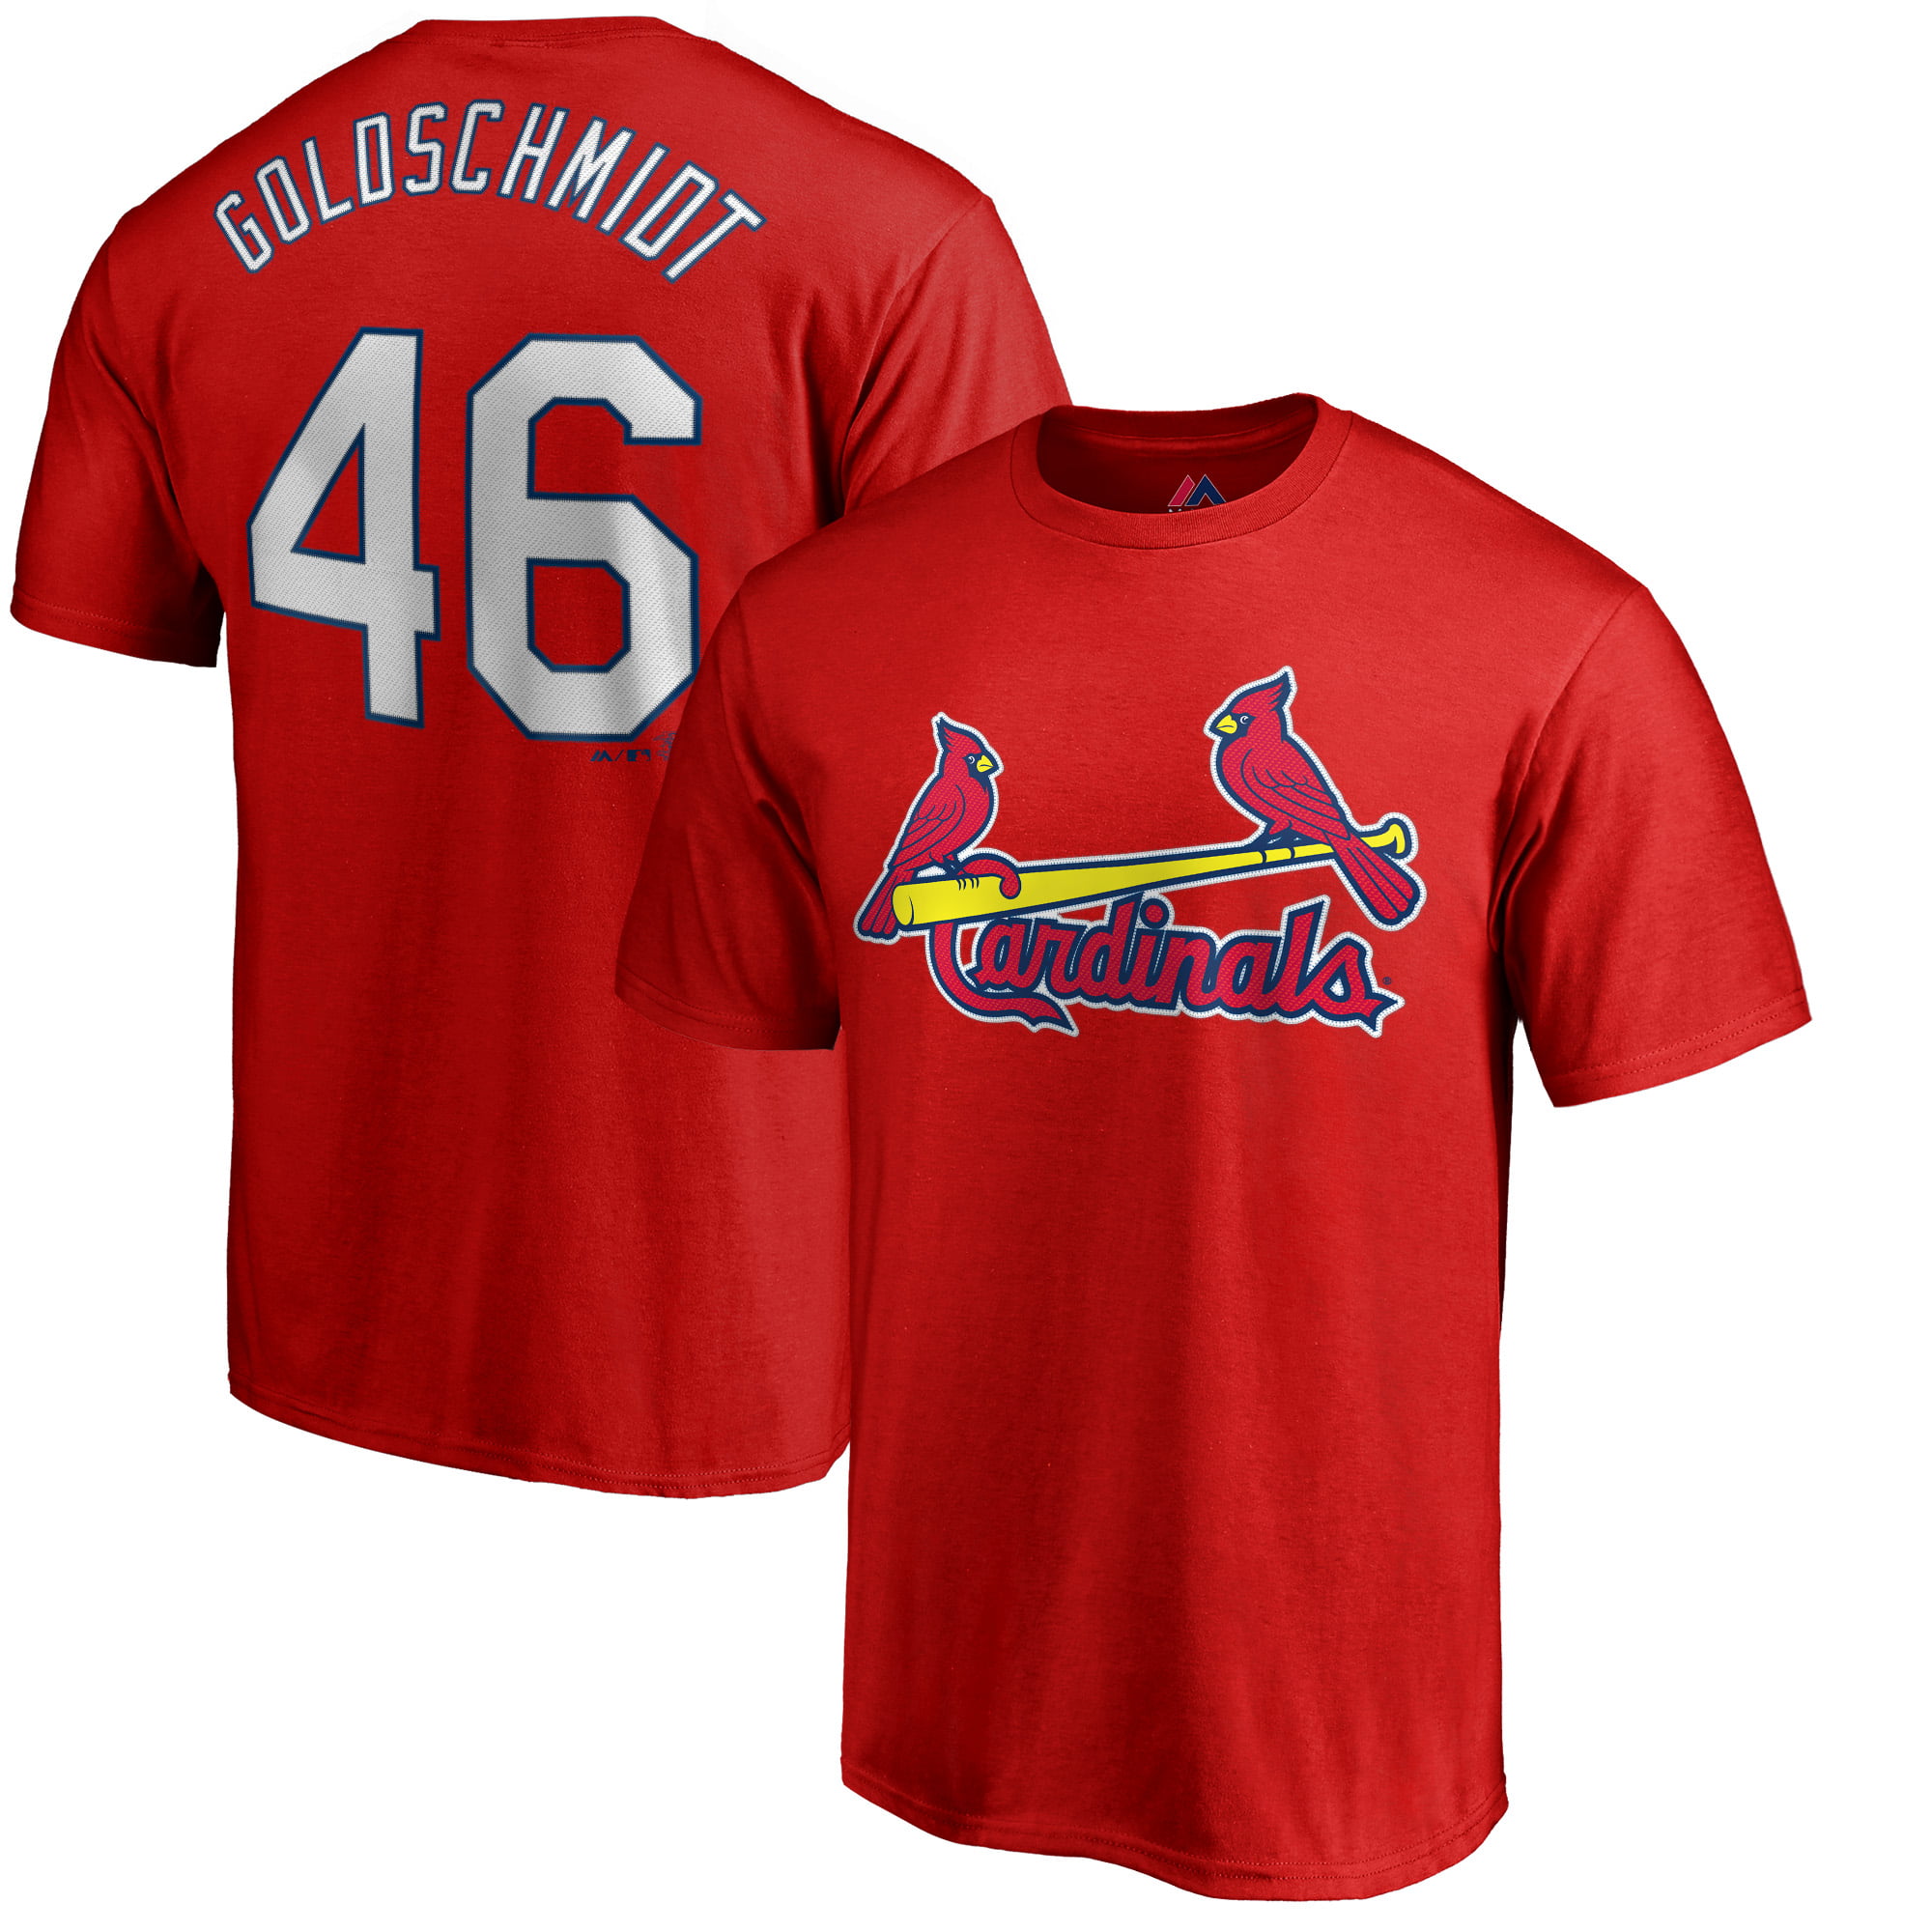 Paul Goldschmidt St. Louis Cardinals Majestic Official Name & Number T-Shirt - Red - www.semashow.com ...